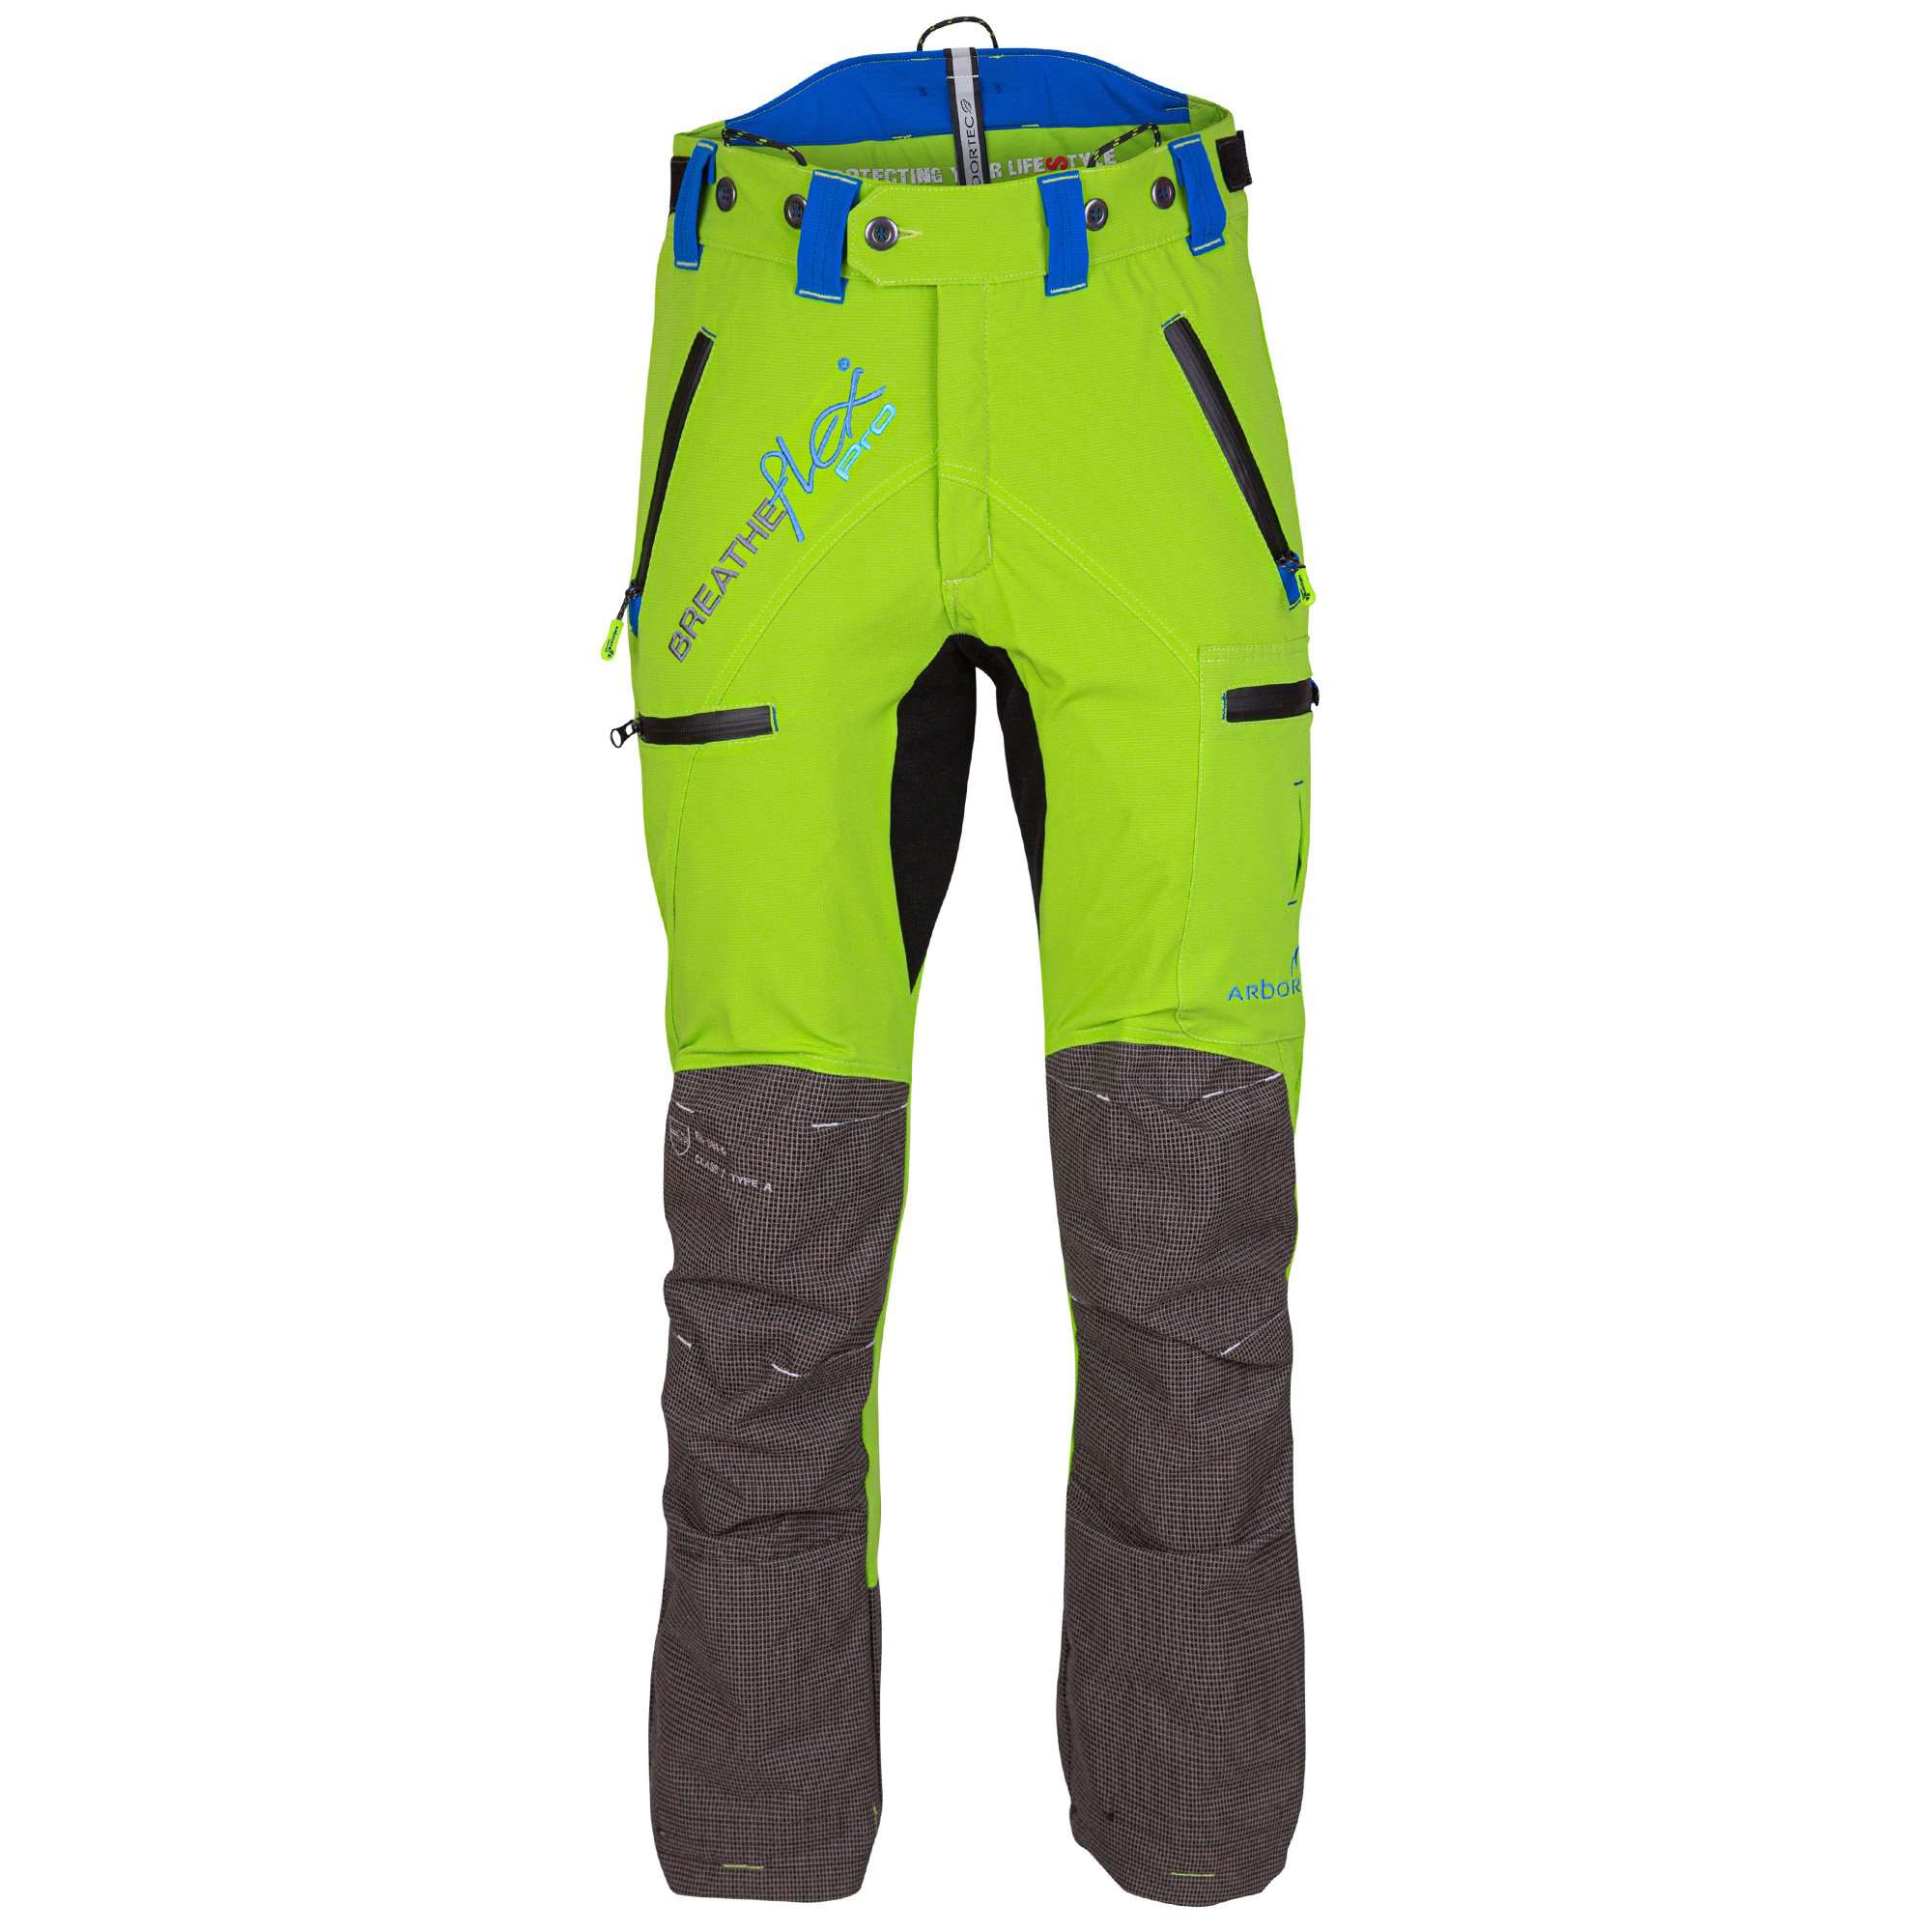 AT4060(US) Breatheflex Pro Chainsaw Trousers UL Rated - Lime